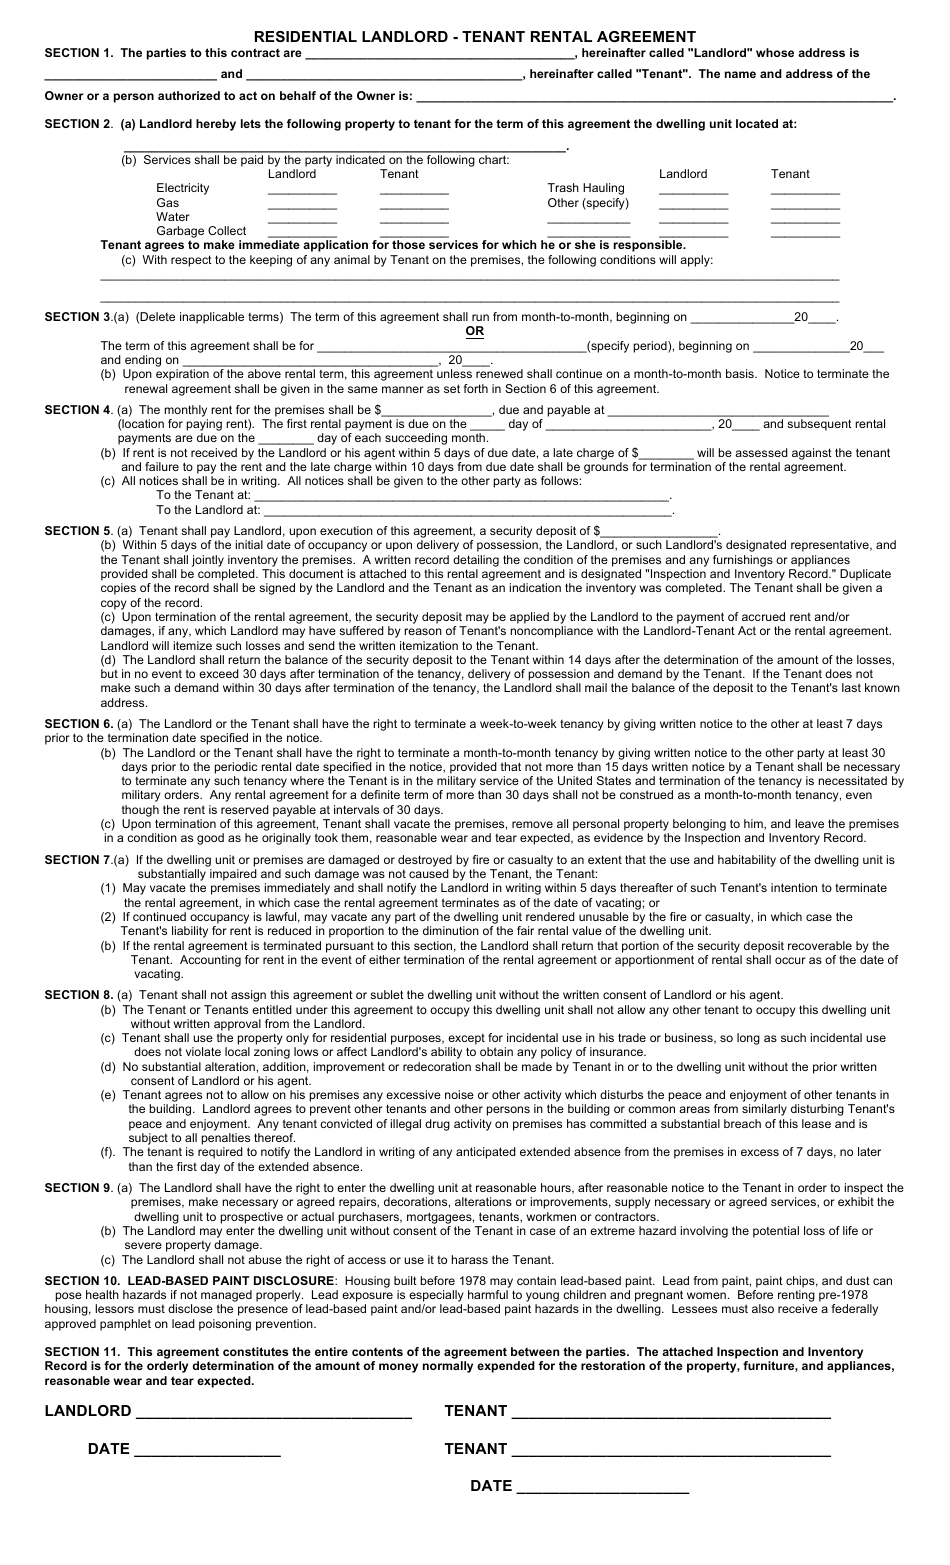 Tenant Rental Agreement Template - Residential Landlord, Page 1